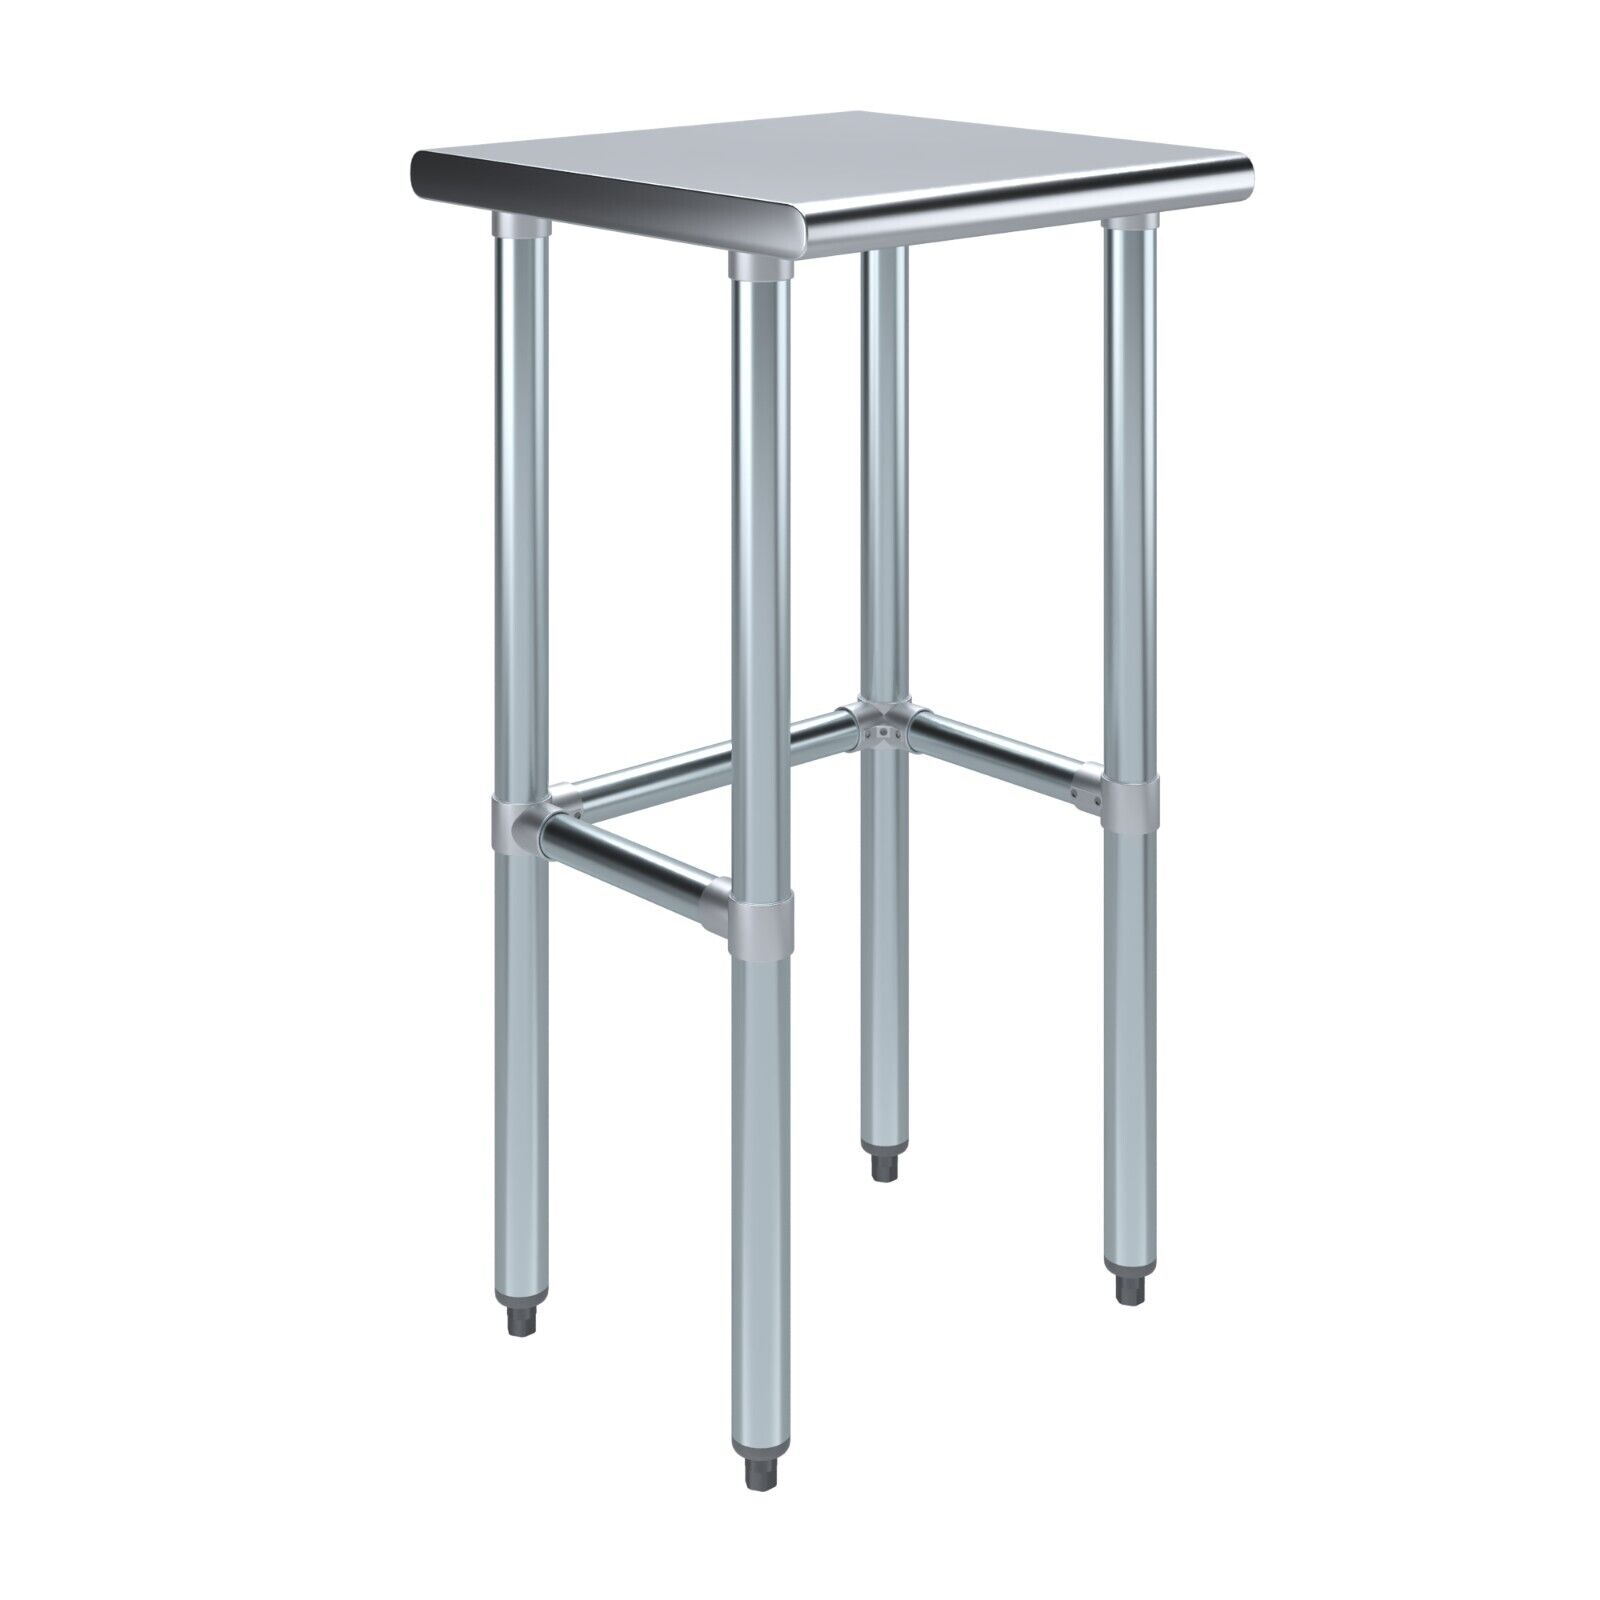 18 in. x 18 in. Open Base Stainless Steel Work Table | Residential & Commercial